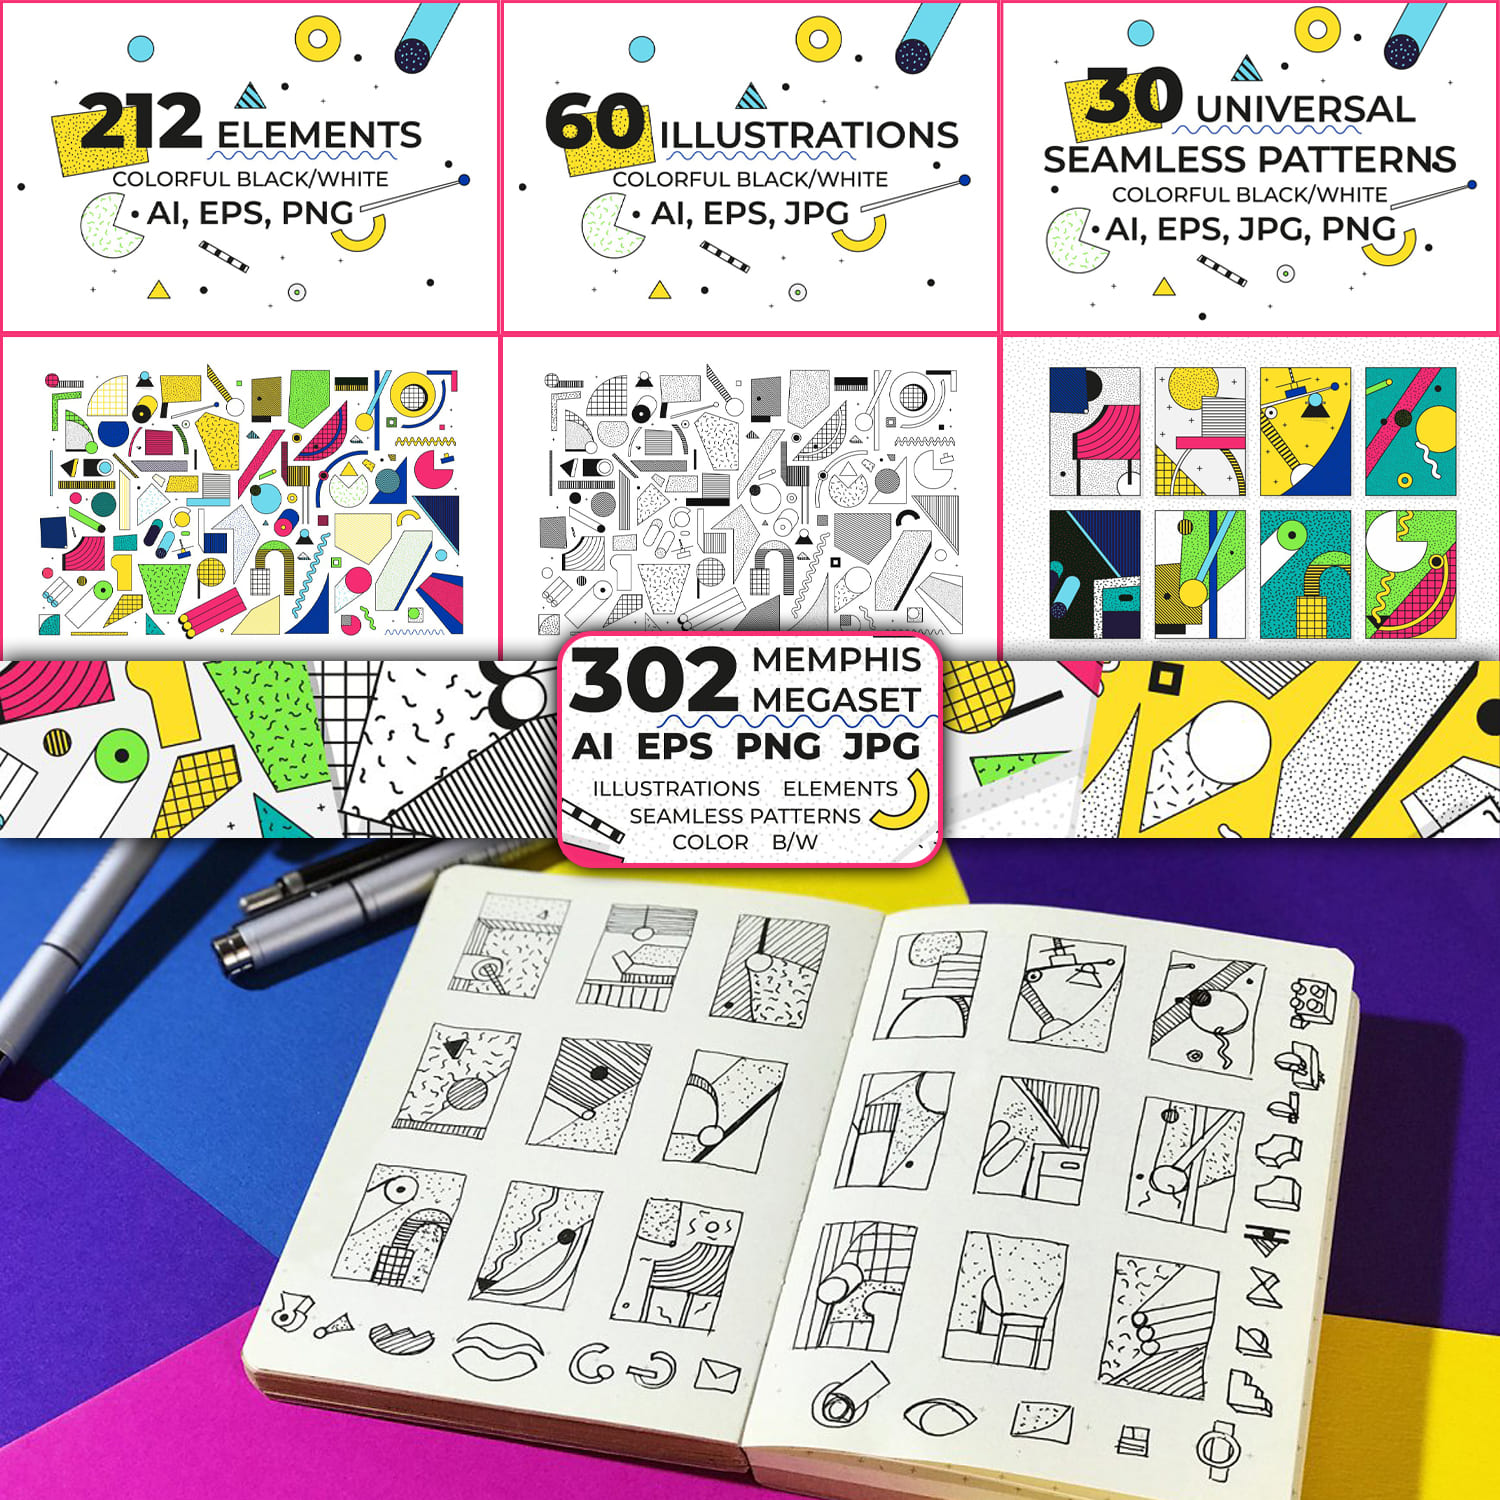 302 illustrations+elements+patterns cover.